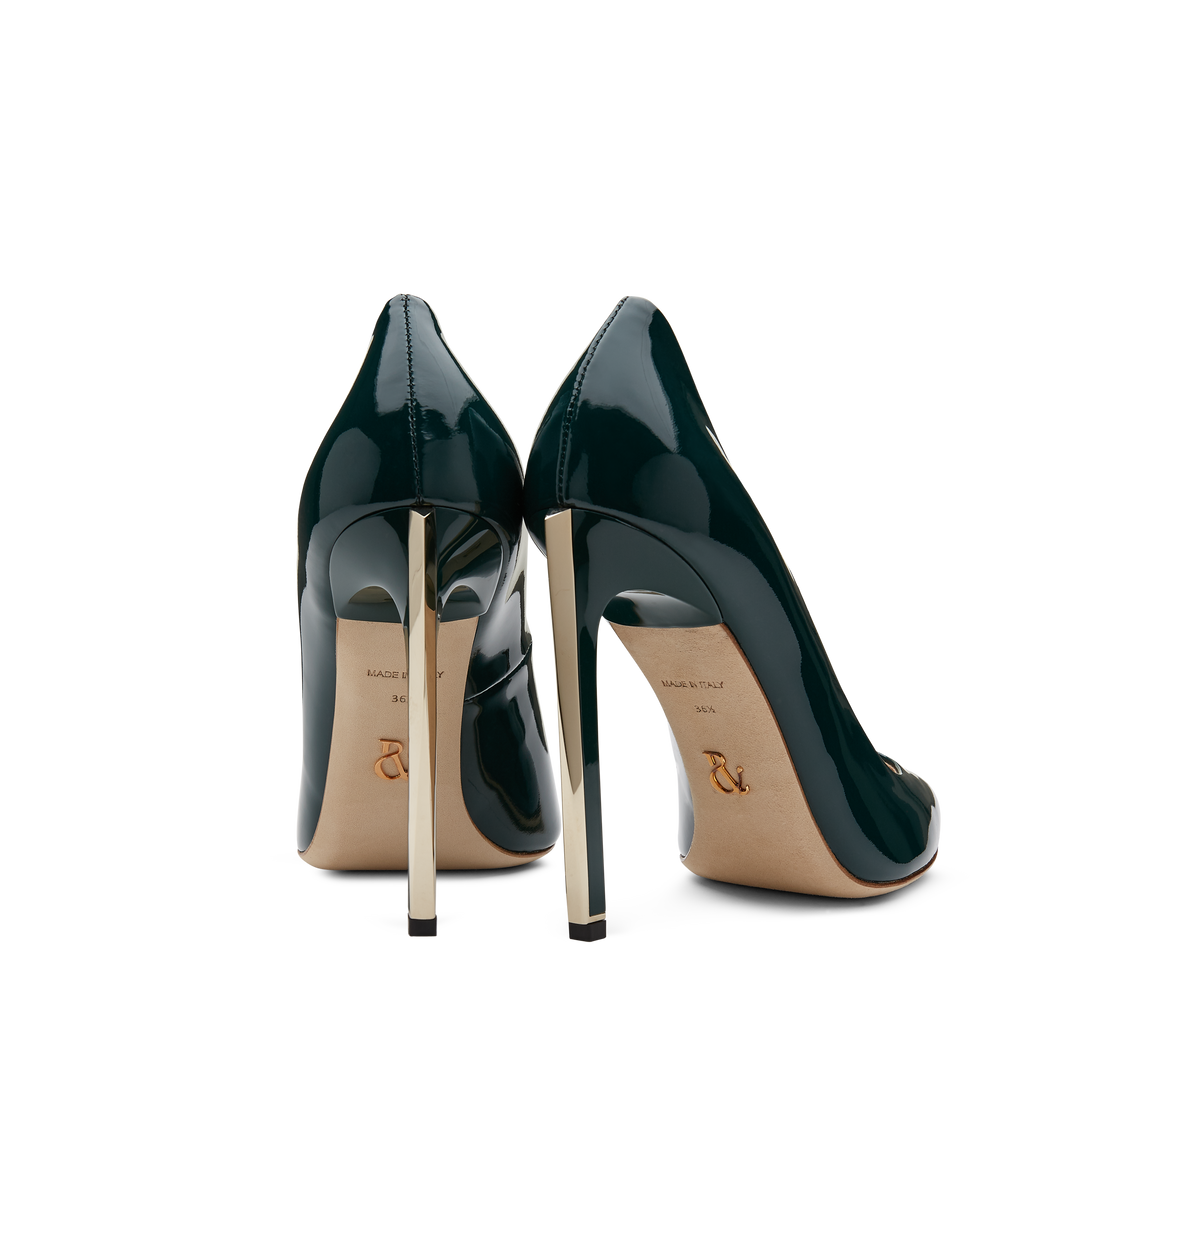 Emerald Patent Leather With Light Gold Hardware